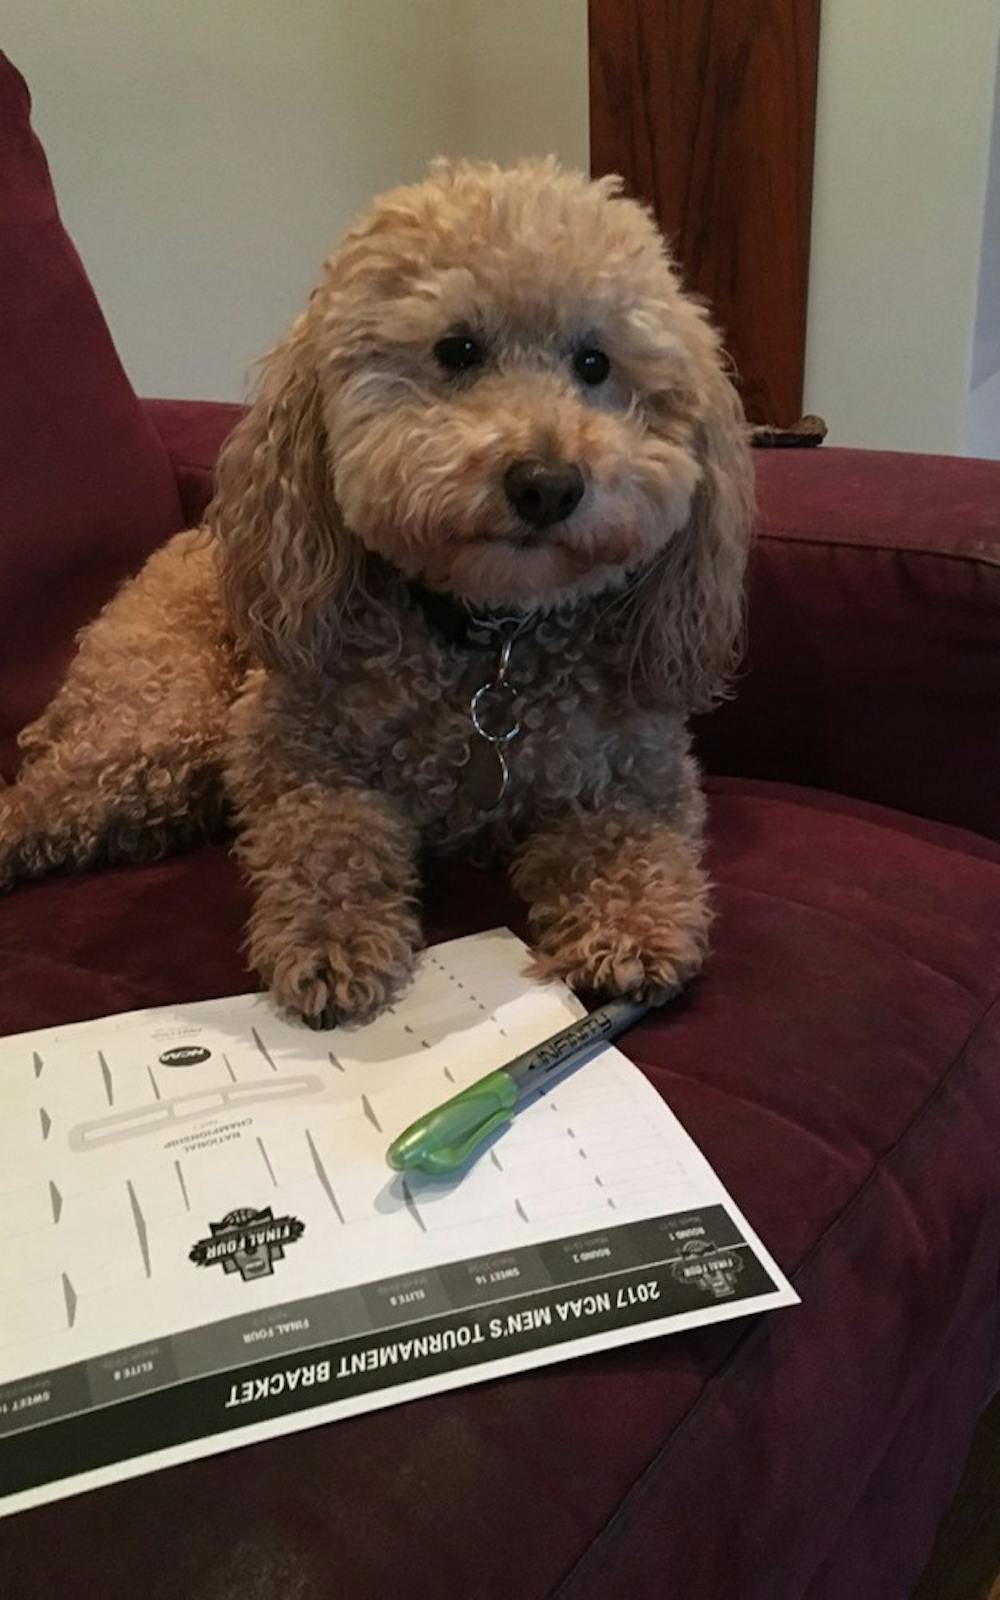 Rascal Gottfried gets set to make his picks for his NCAA March Madness bracket. He, along with all other college basketball fans, will fill it out early next week after selection Sunday.